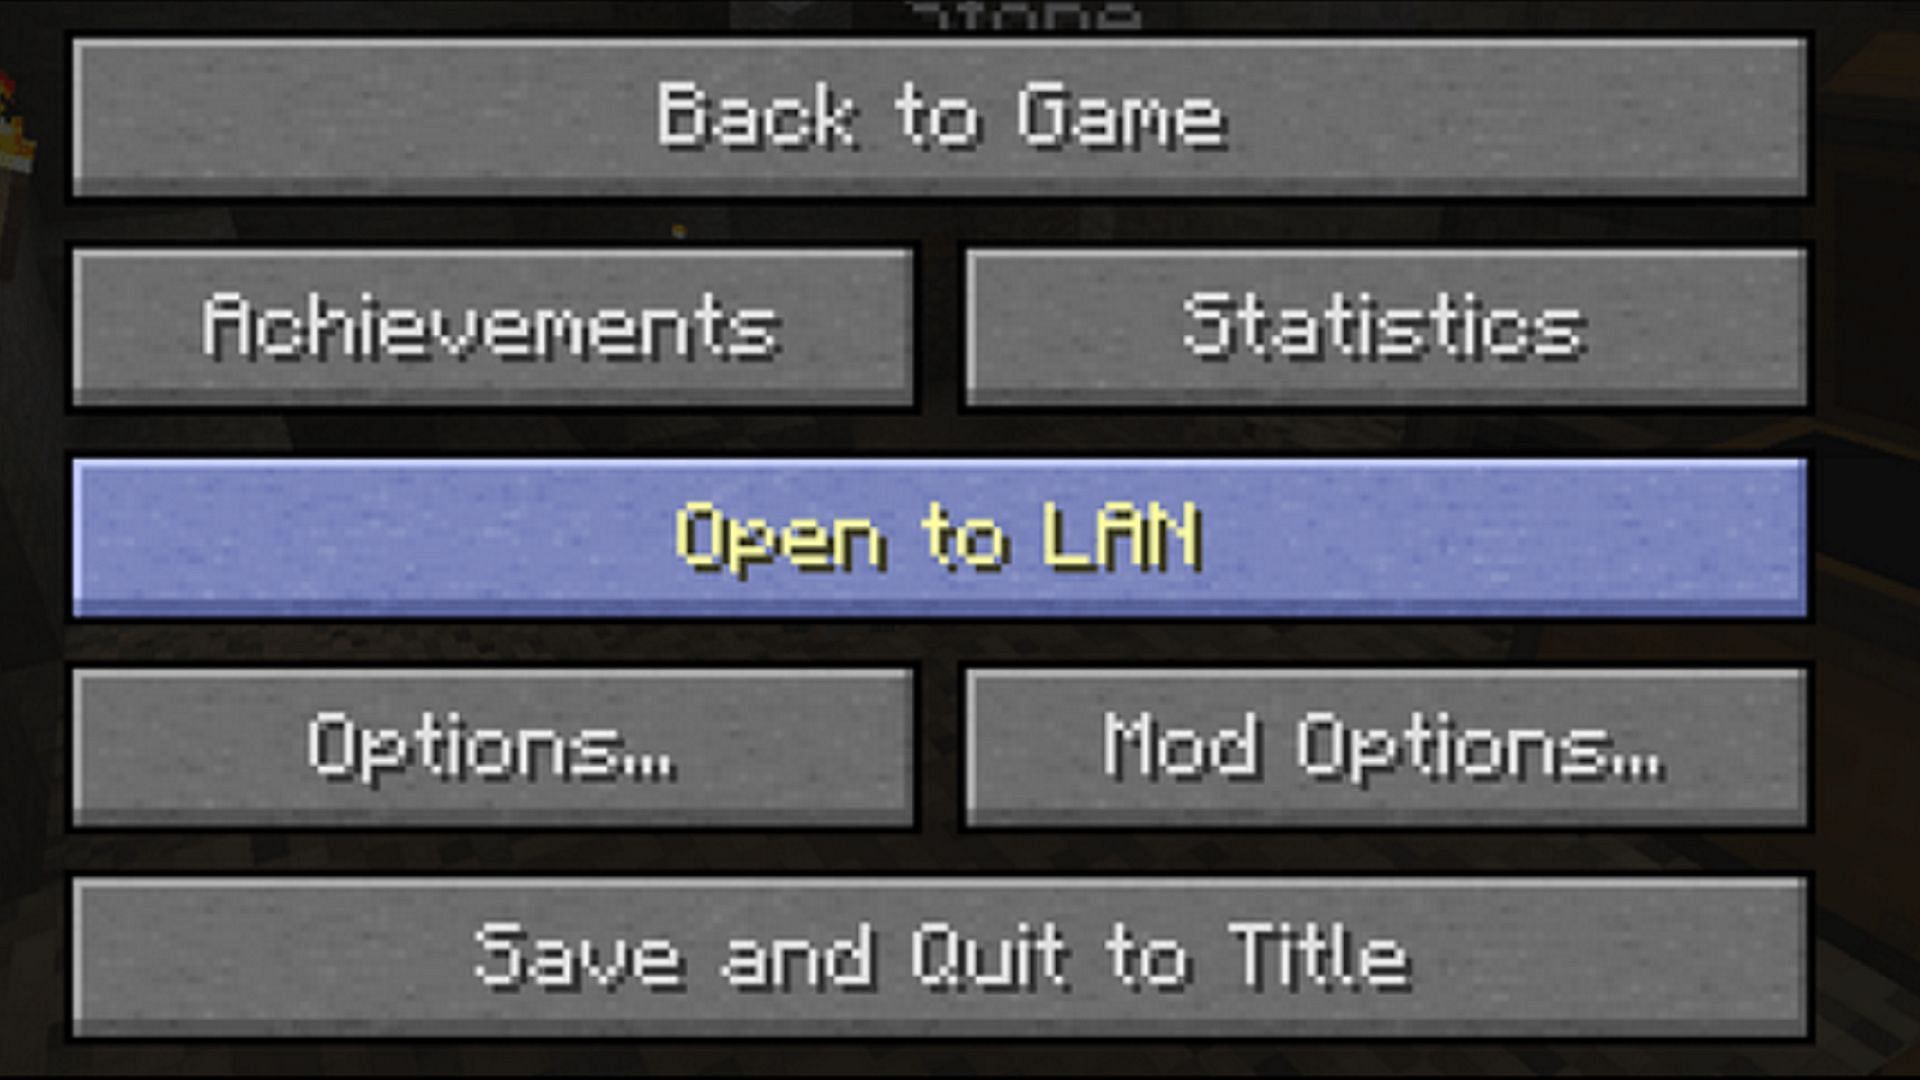 How does Open to LAN work in Minecraft?